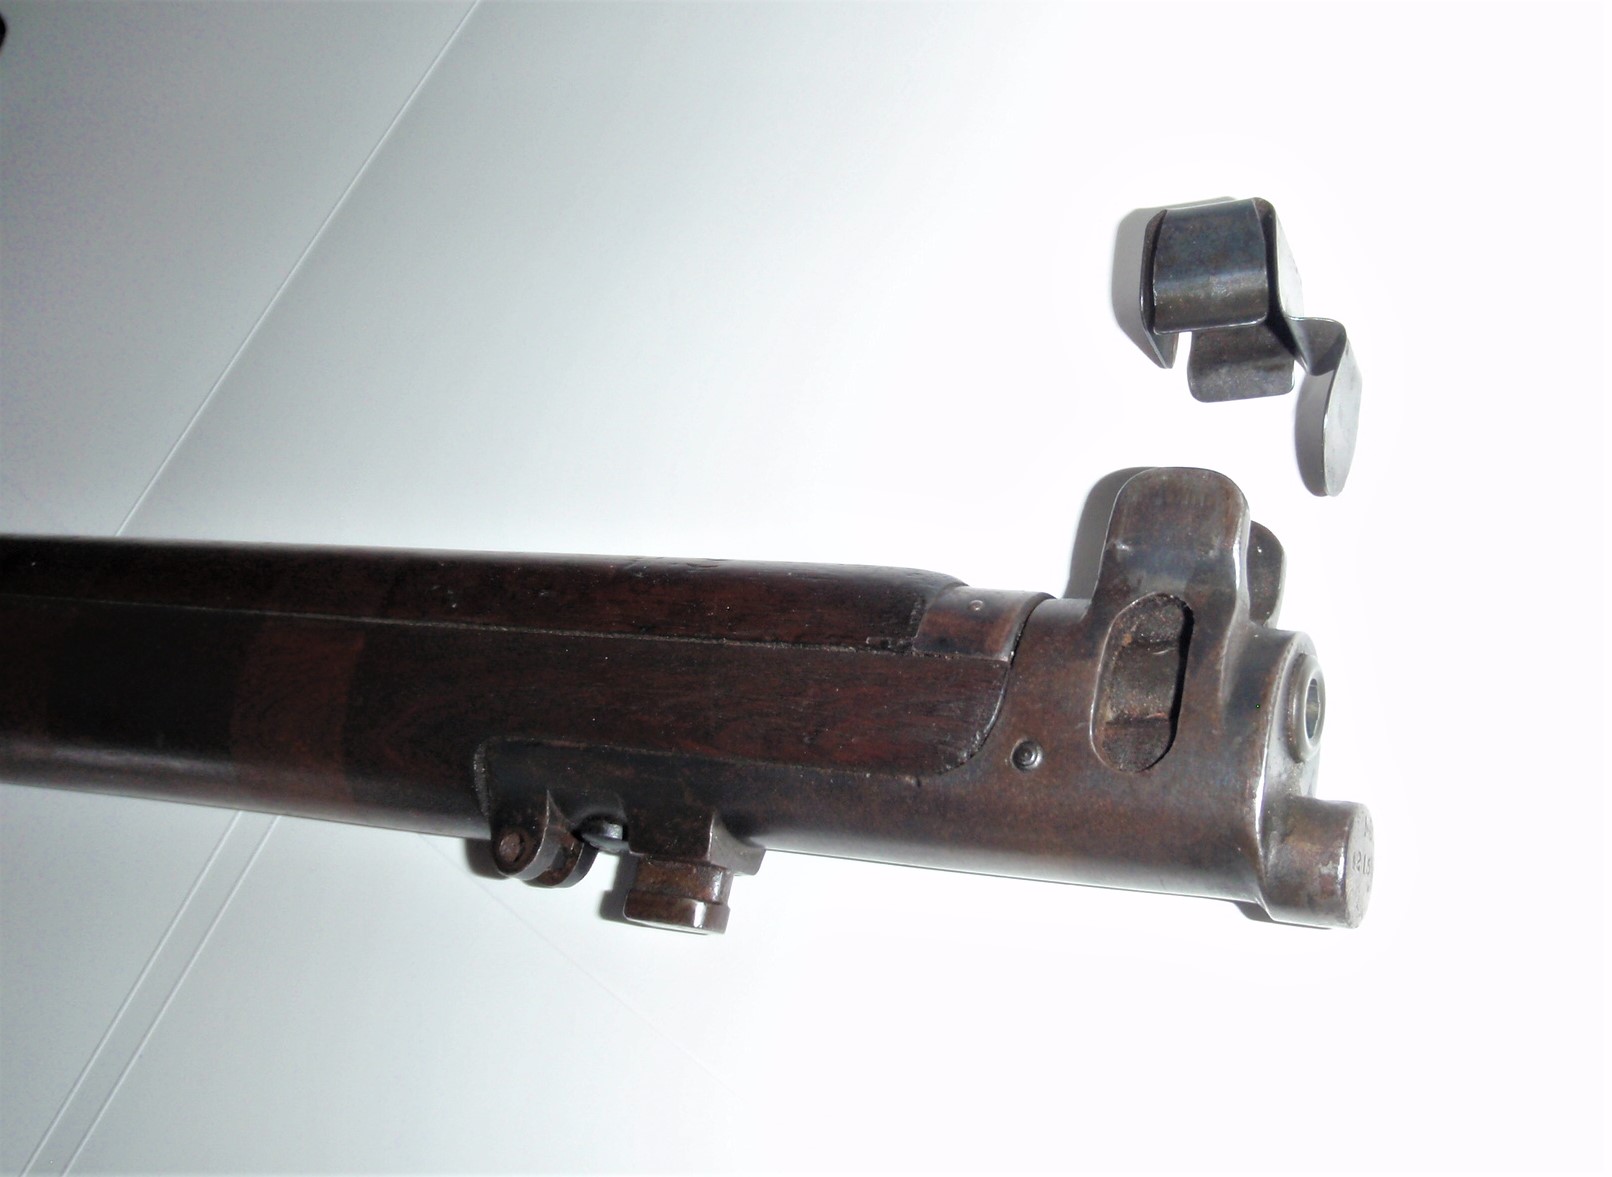 Muzzle cap with Bayonet boss and slide. Above is a foresight protector with muzzle cover.